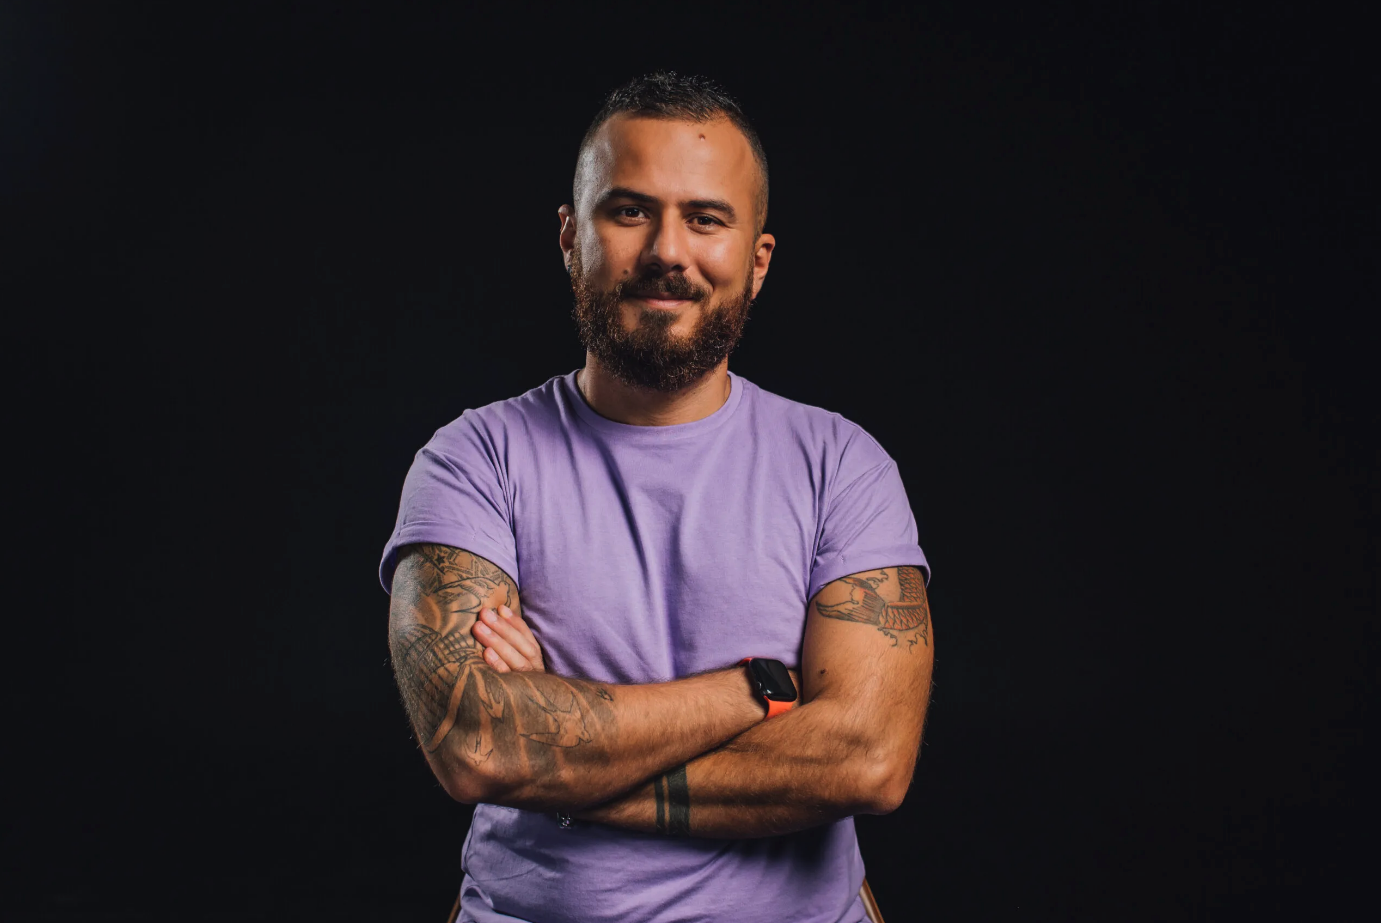 Author bio photo: Danny in a purple t-shirt, arms crossed, smiling